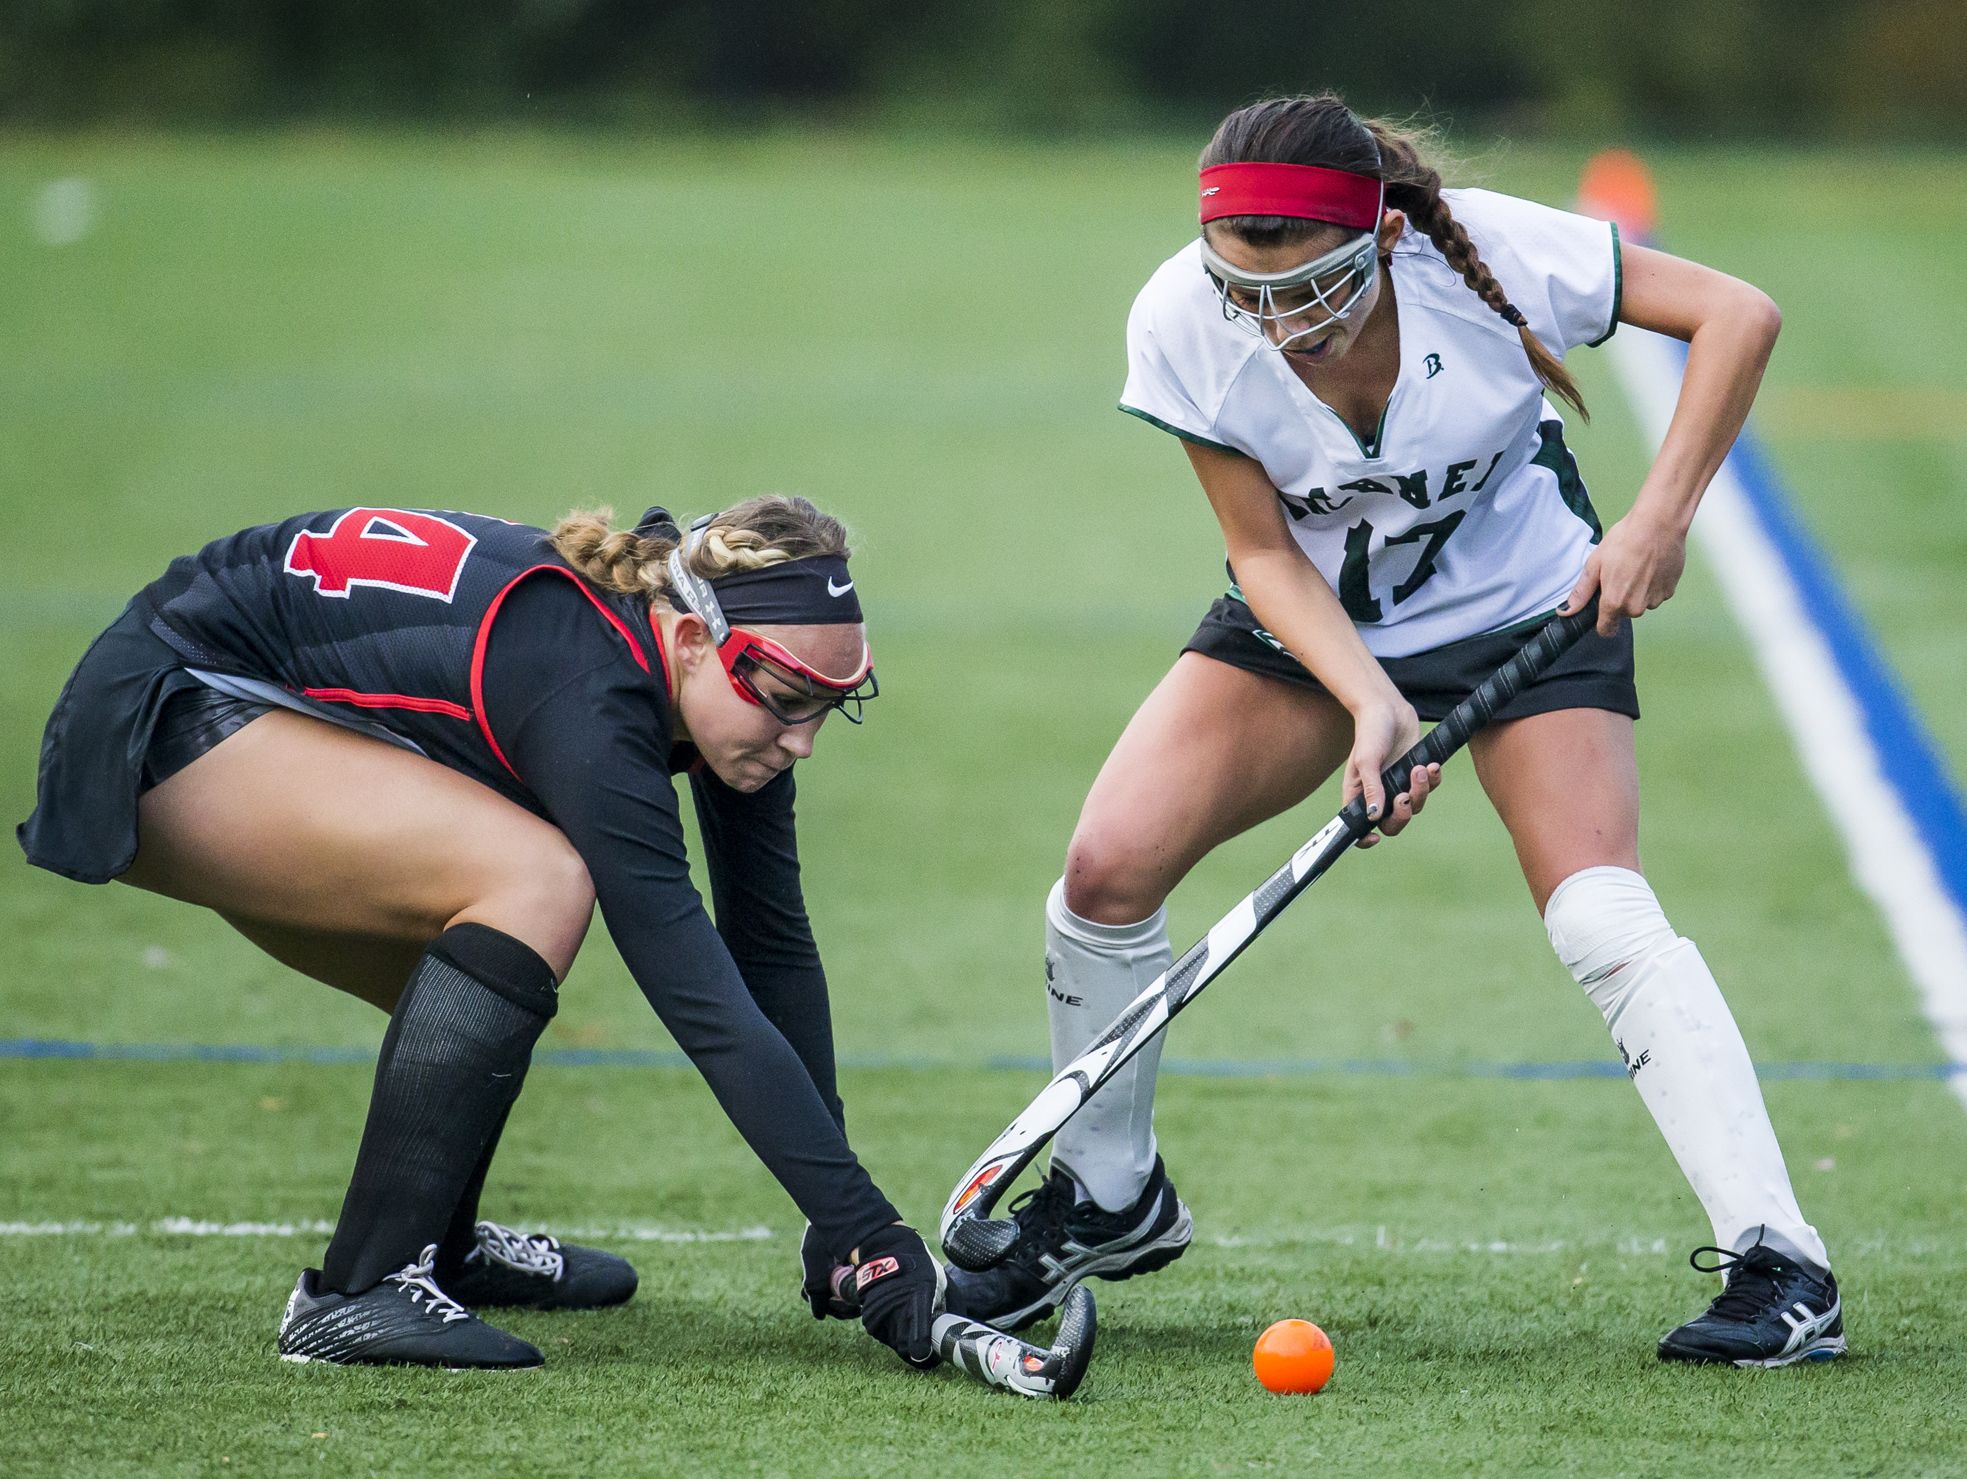 Polytech's Madison Knight (left) and Archmere's Lauren Ross (right) in the second half of Polytech's 1-0 win over Archmere at Archmere Academy in their DIAA playoff game on Wednesday afternoon.